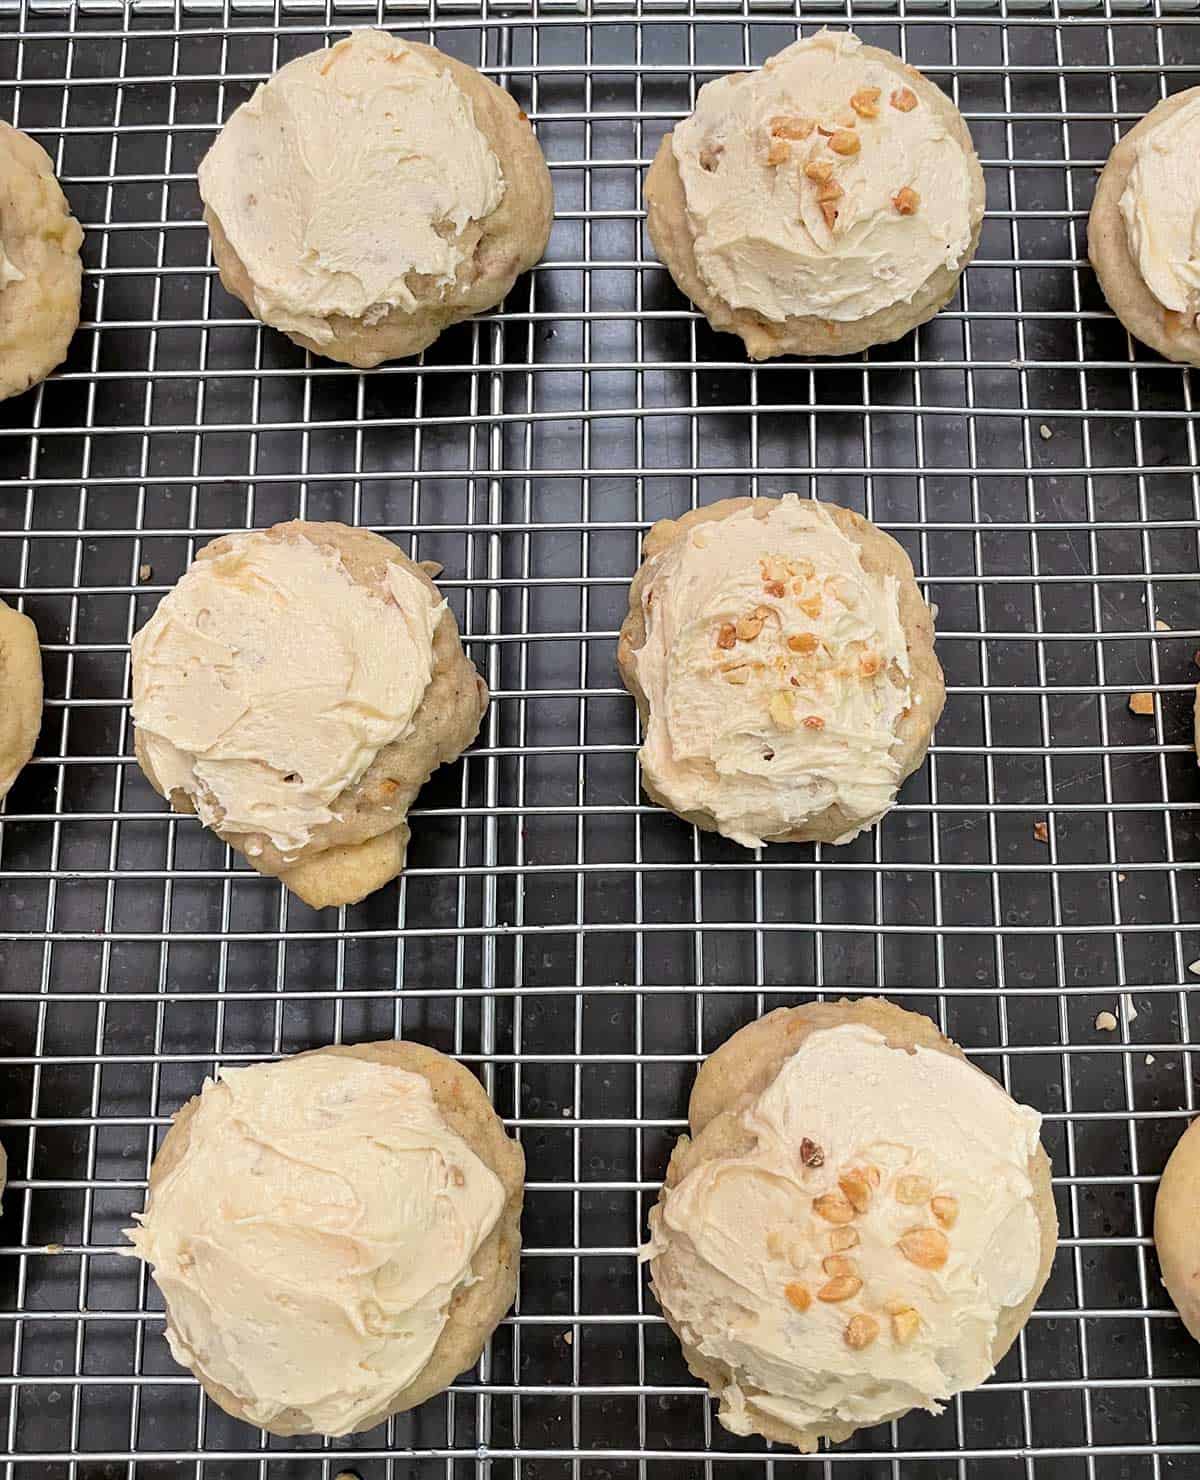 Cookies half with just icing and half with icing and chopped peanuts on top.